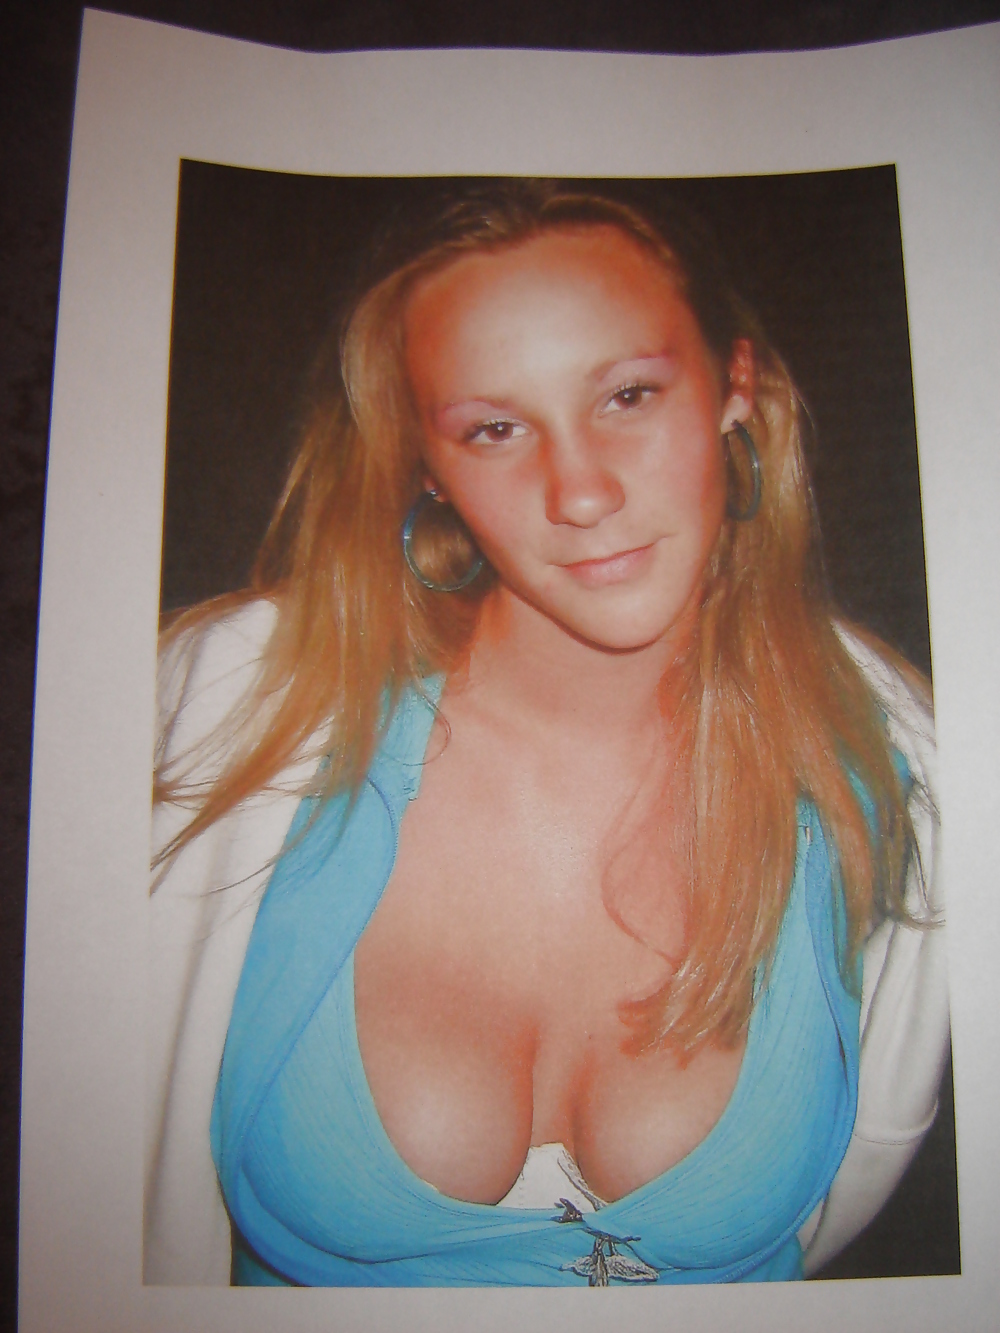 another tribute for kelly adult photos